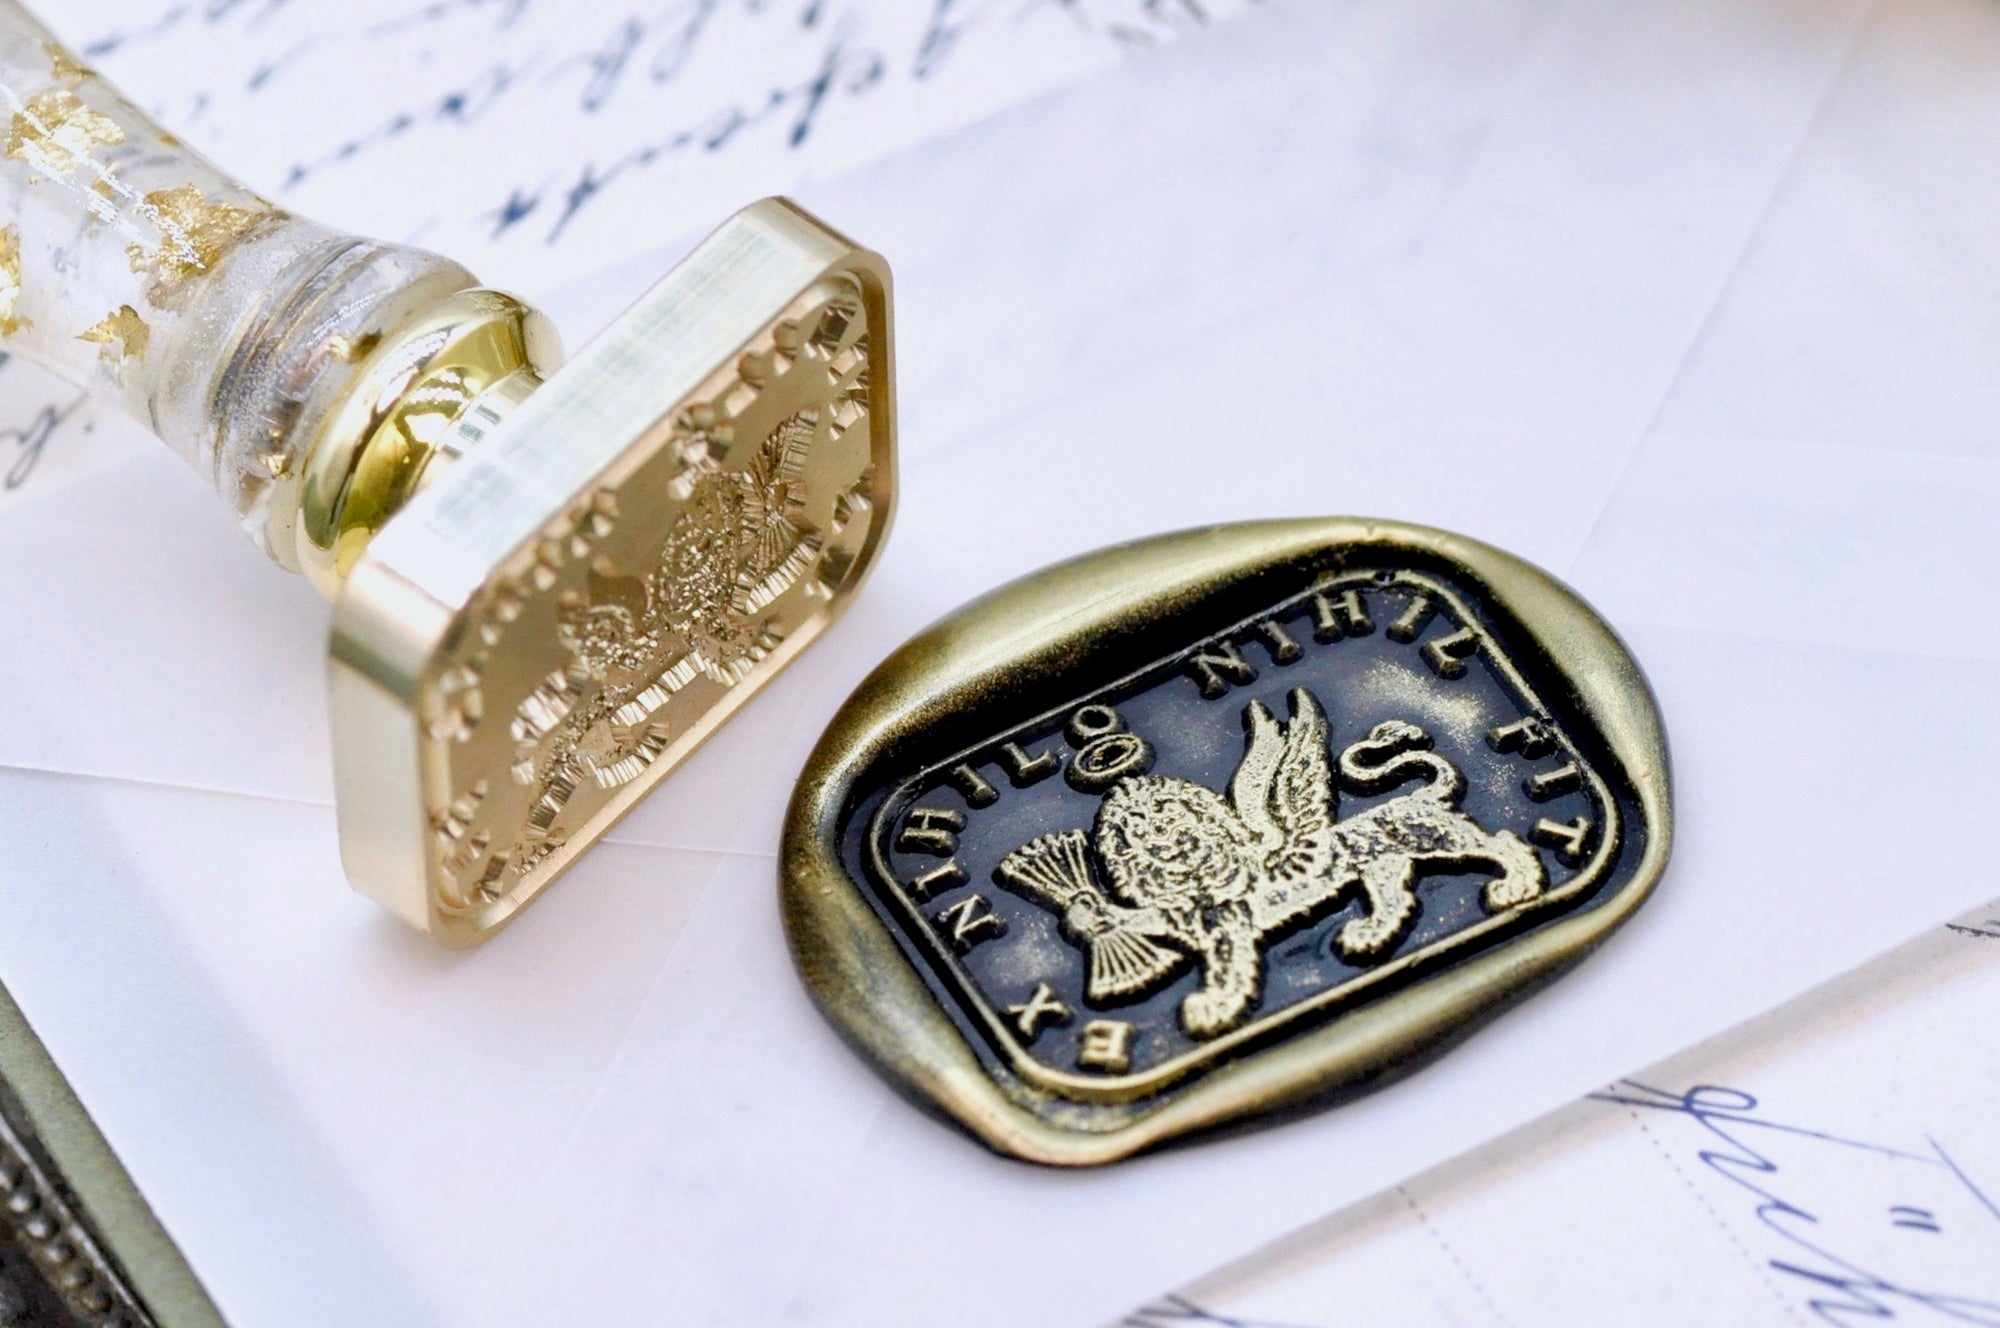 Winged Lion Latin Motto Wax Seal Stamp